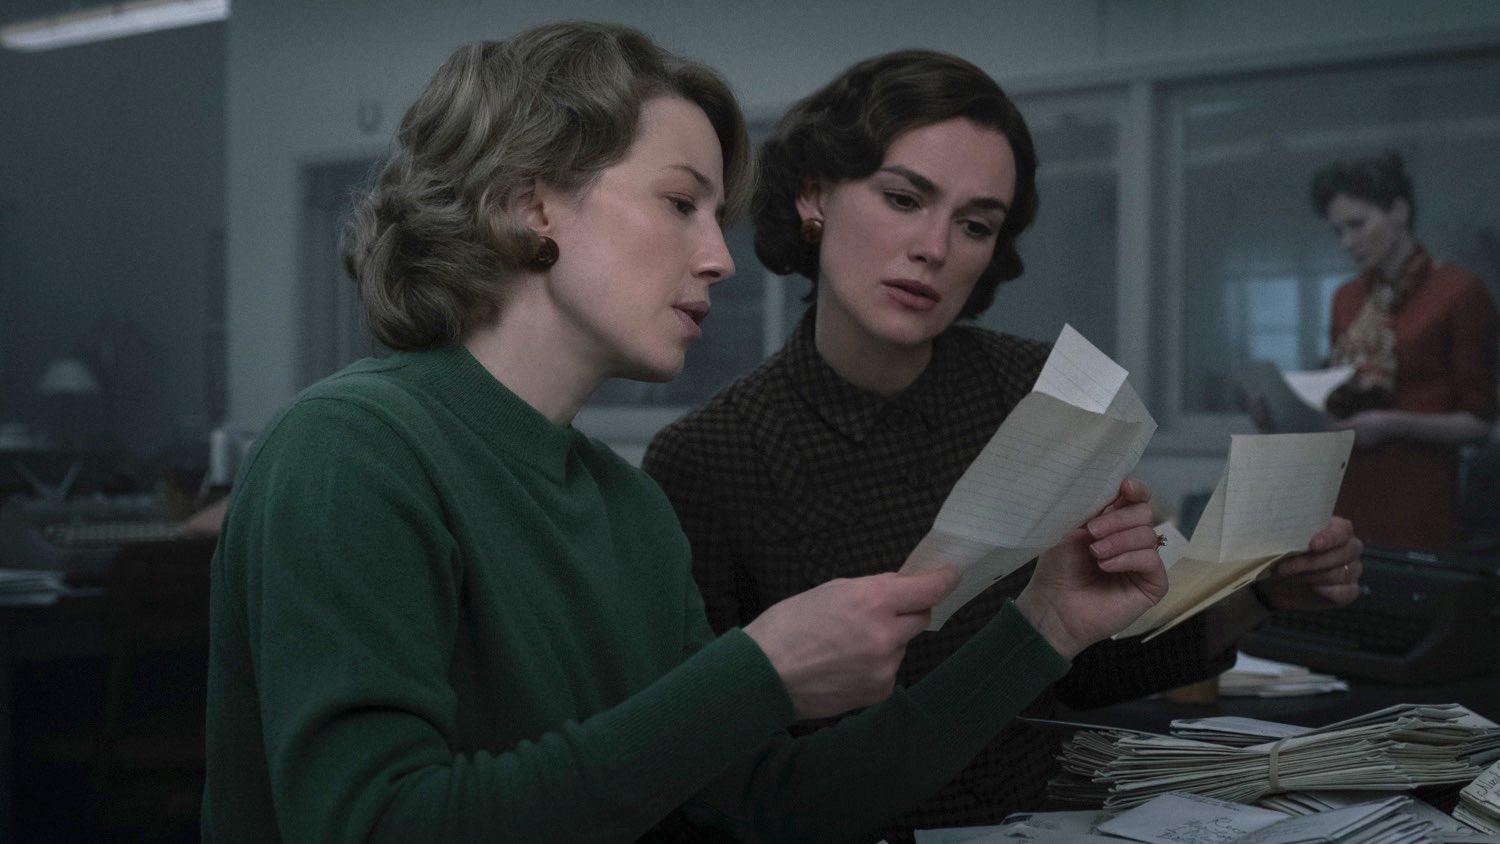 Keira Knightley and Carrie Coon star in "The Boston Strangler". (20th Century Studios)